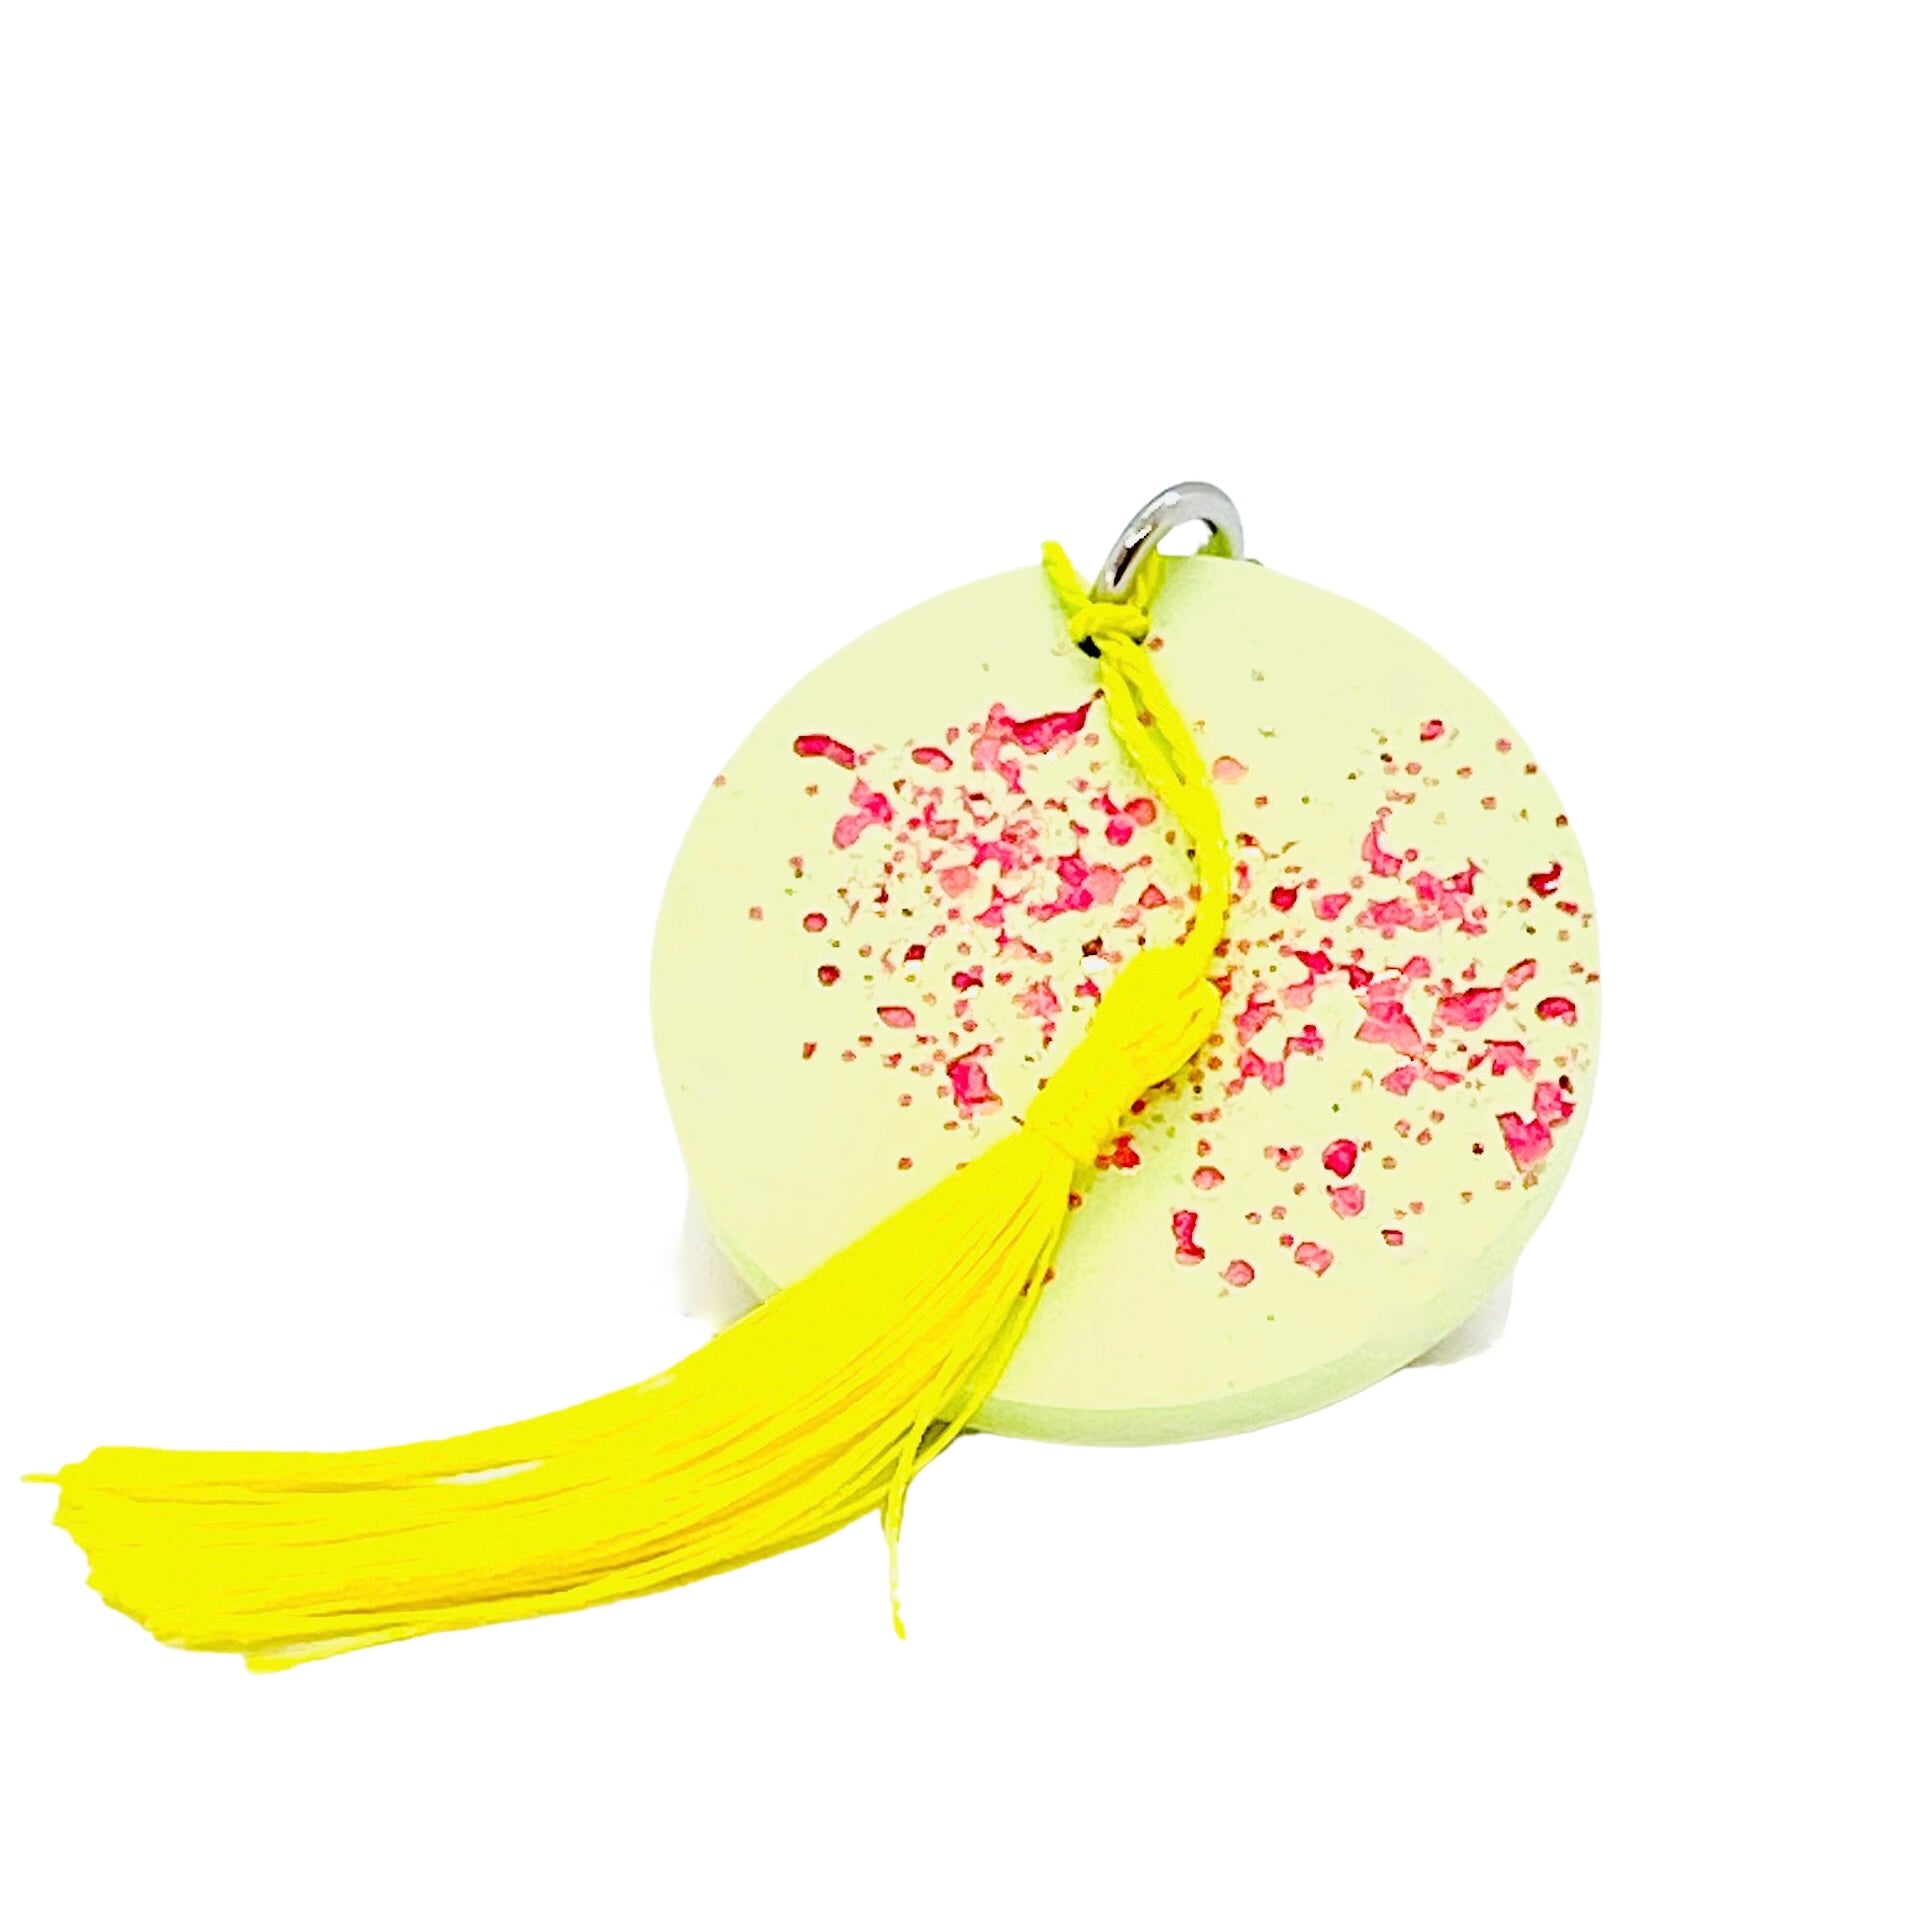 A round Jesmonite disc keyring measuring 6cm in diameter coloured with lime green pigment and sprinkled with pink glitter.